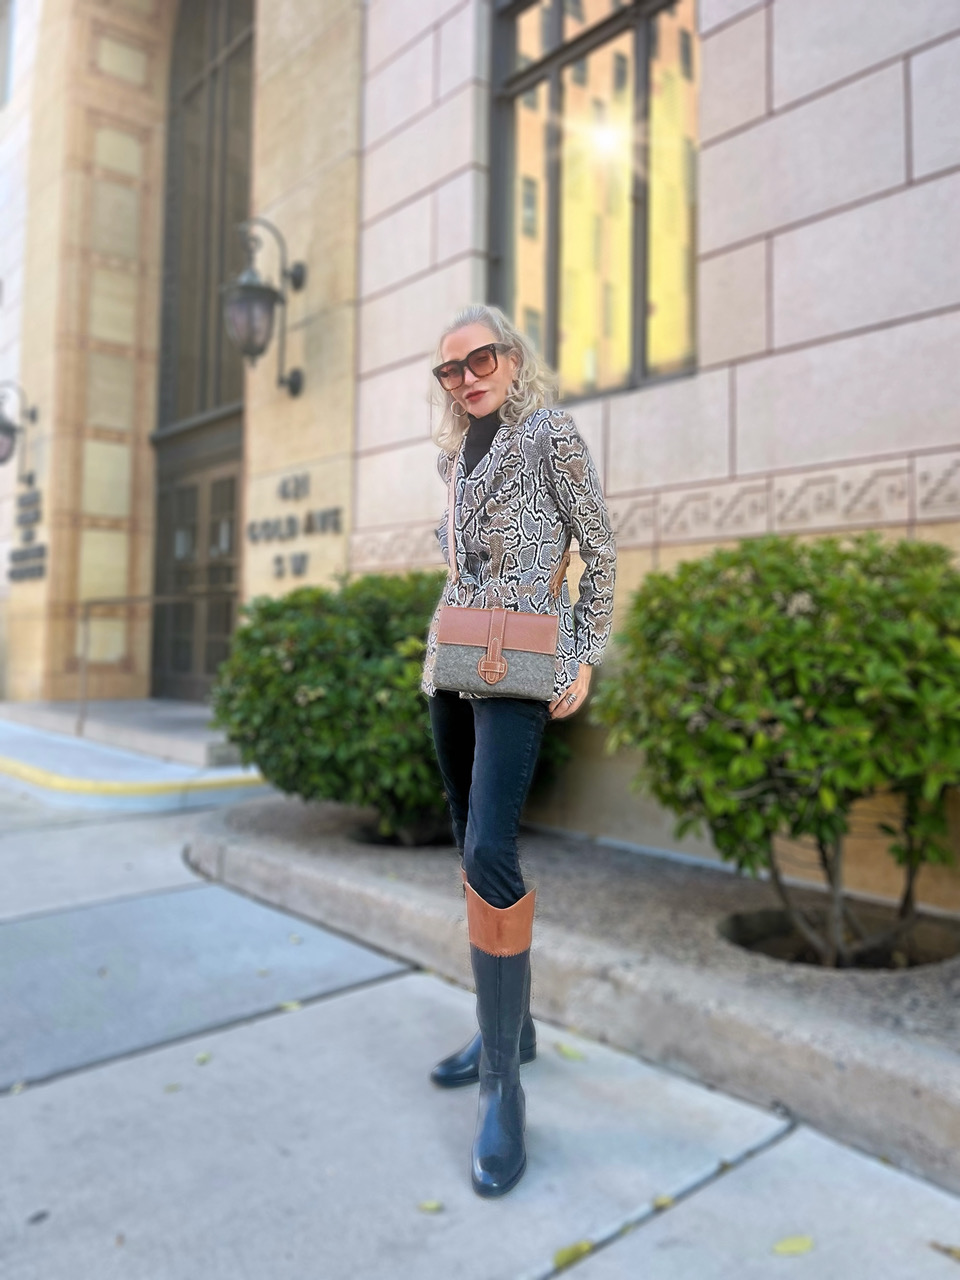 Lifestyle Influencer, jamie lewinger of More Than turquoise wearing Leanne crossbody bag from Modus Rio 